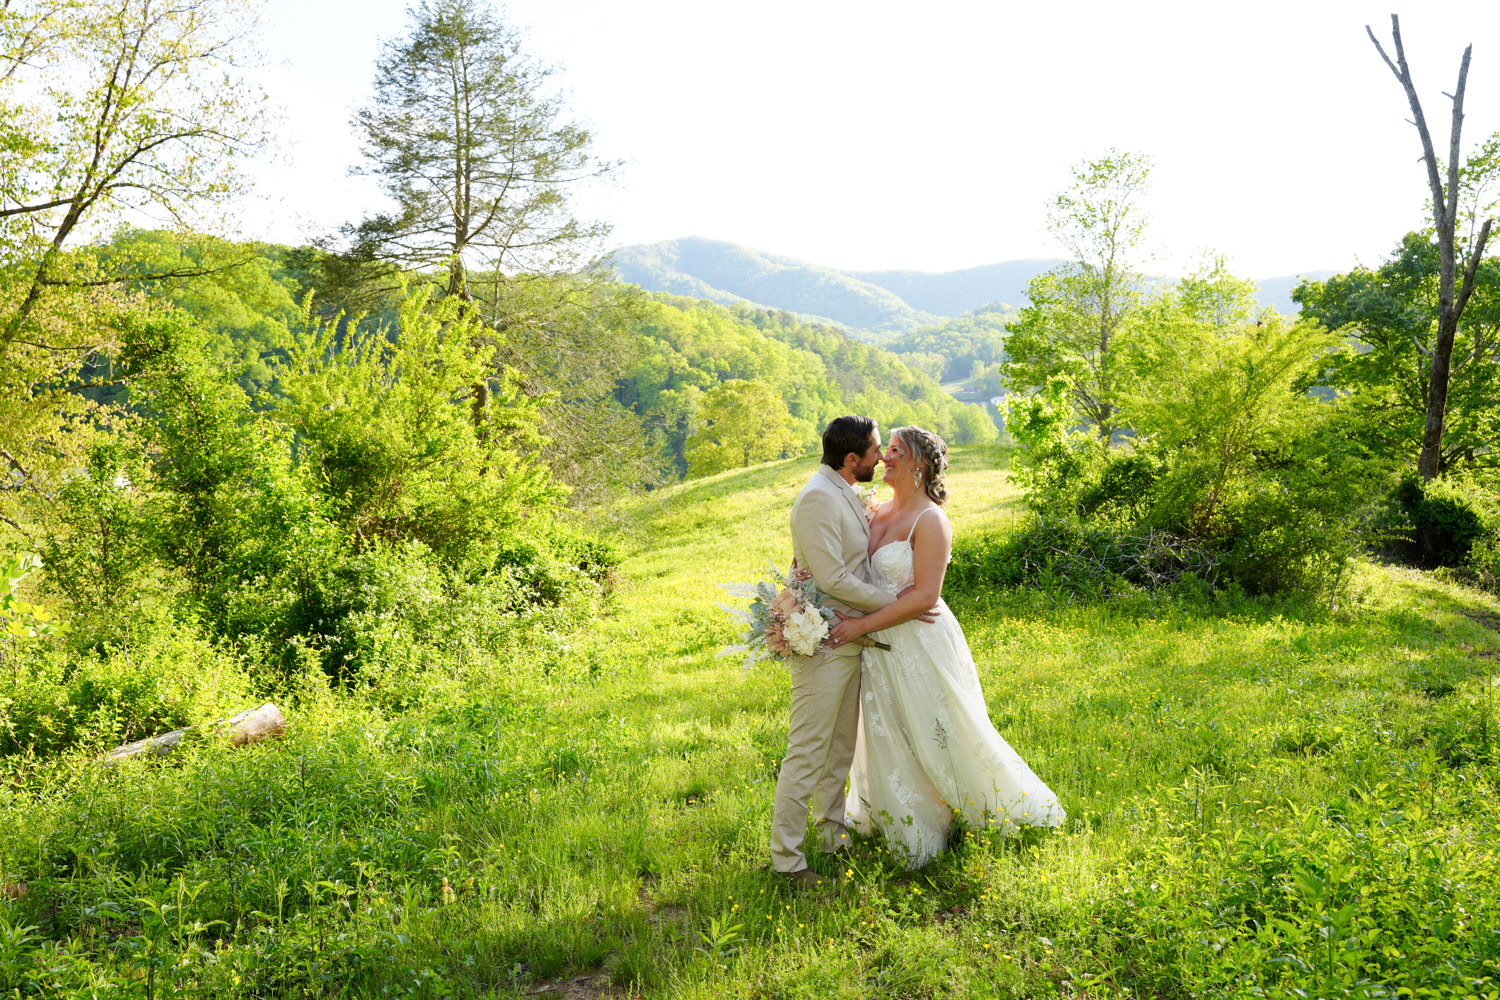 Mountain view wedding couple at Honeysuckle Hills in Pigeon Forge in early spring in a field